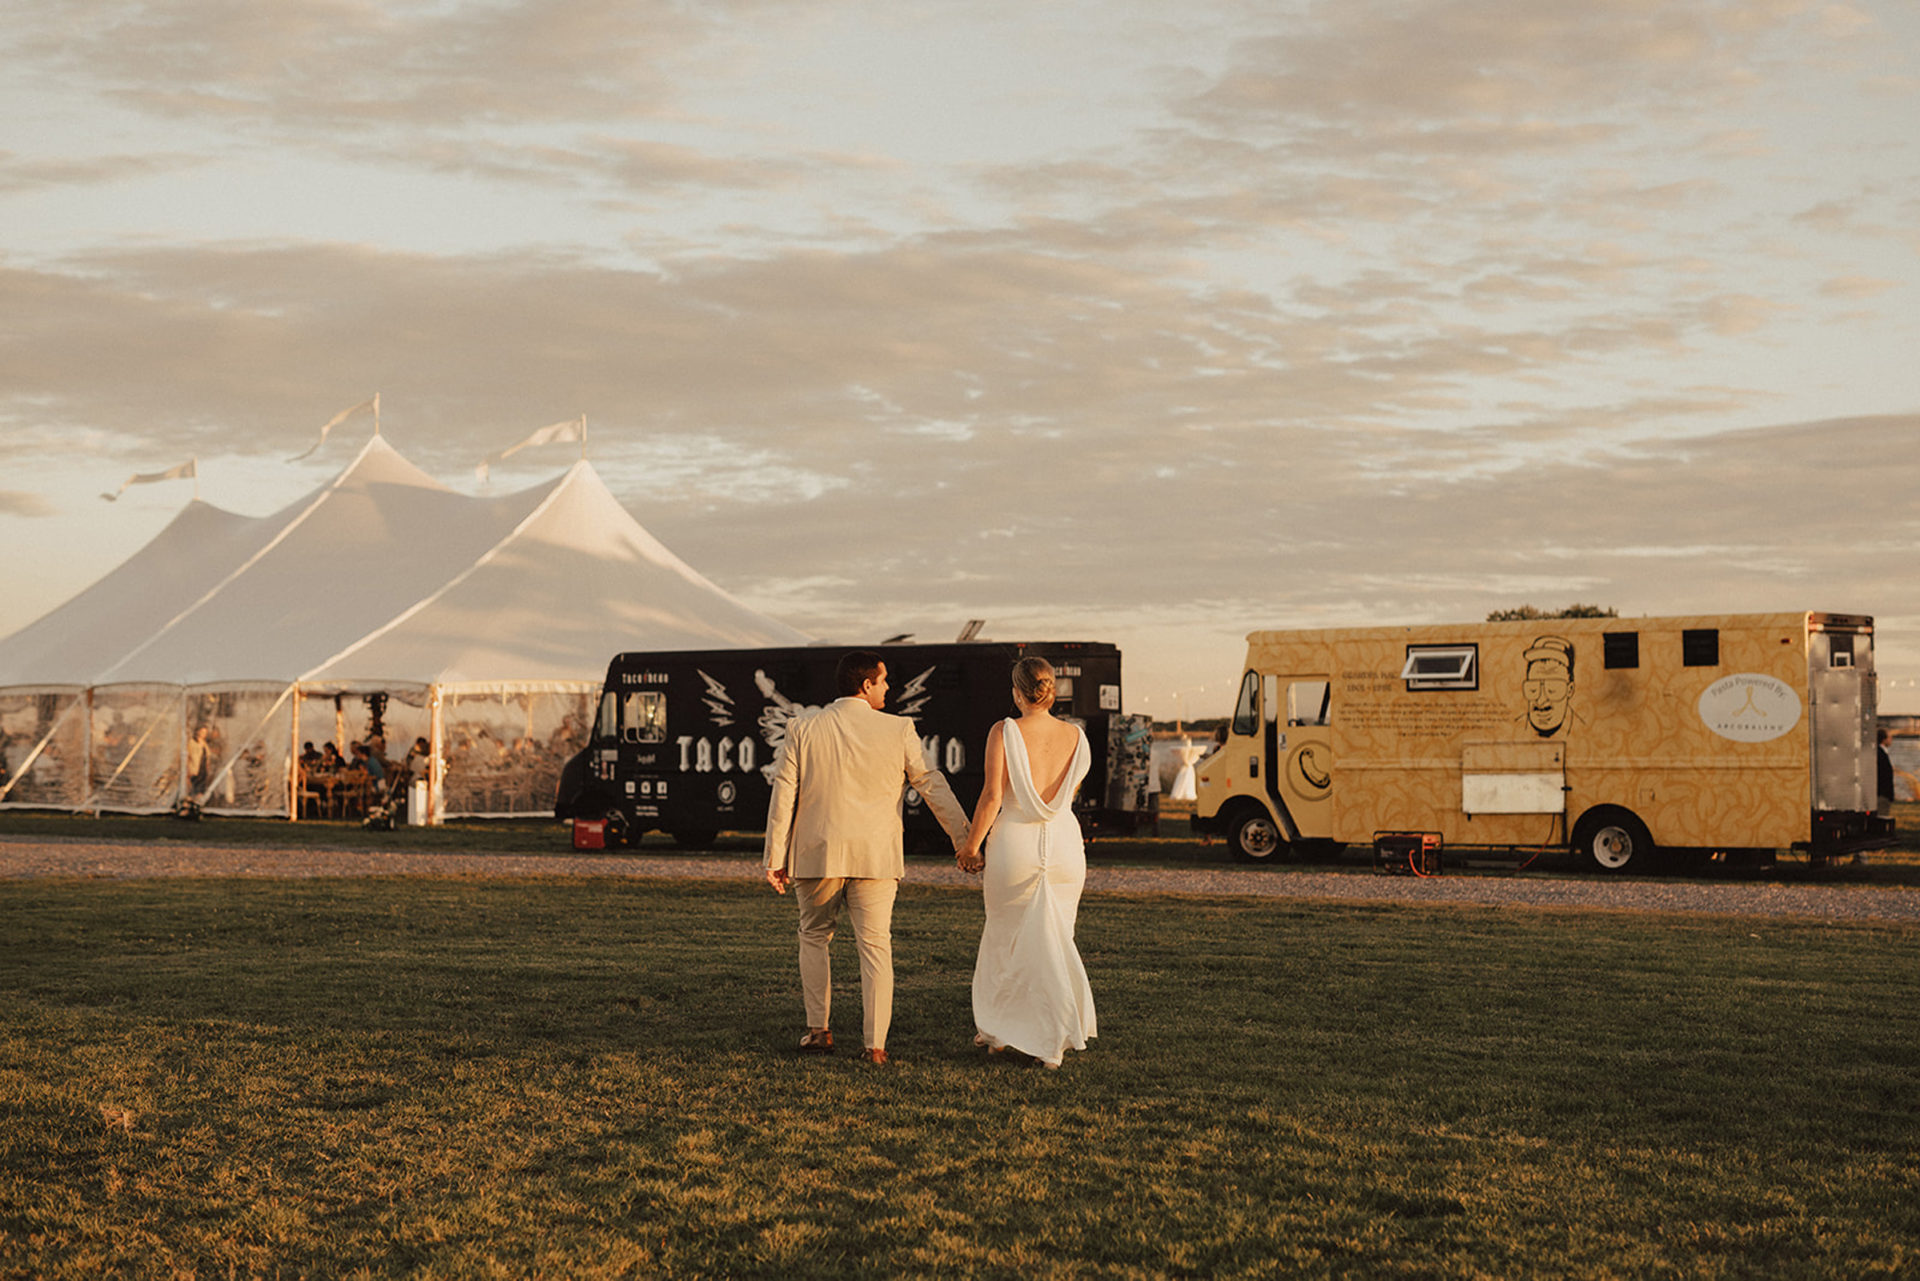 Large white tent for wedding reception and food trucks